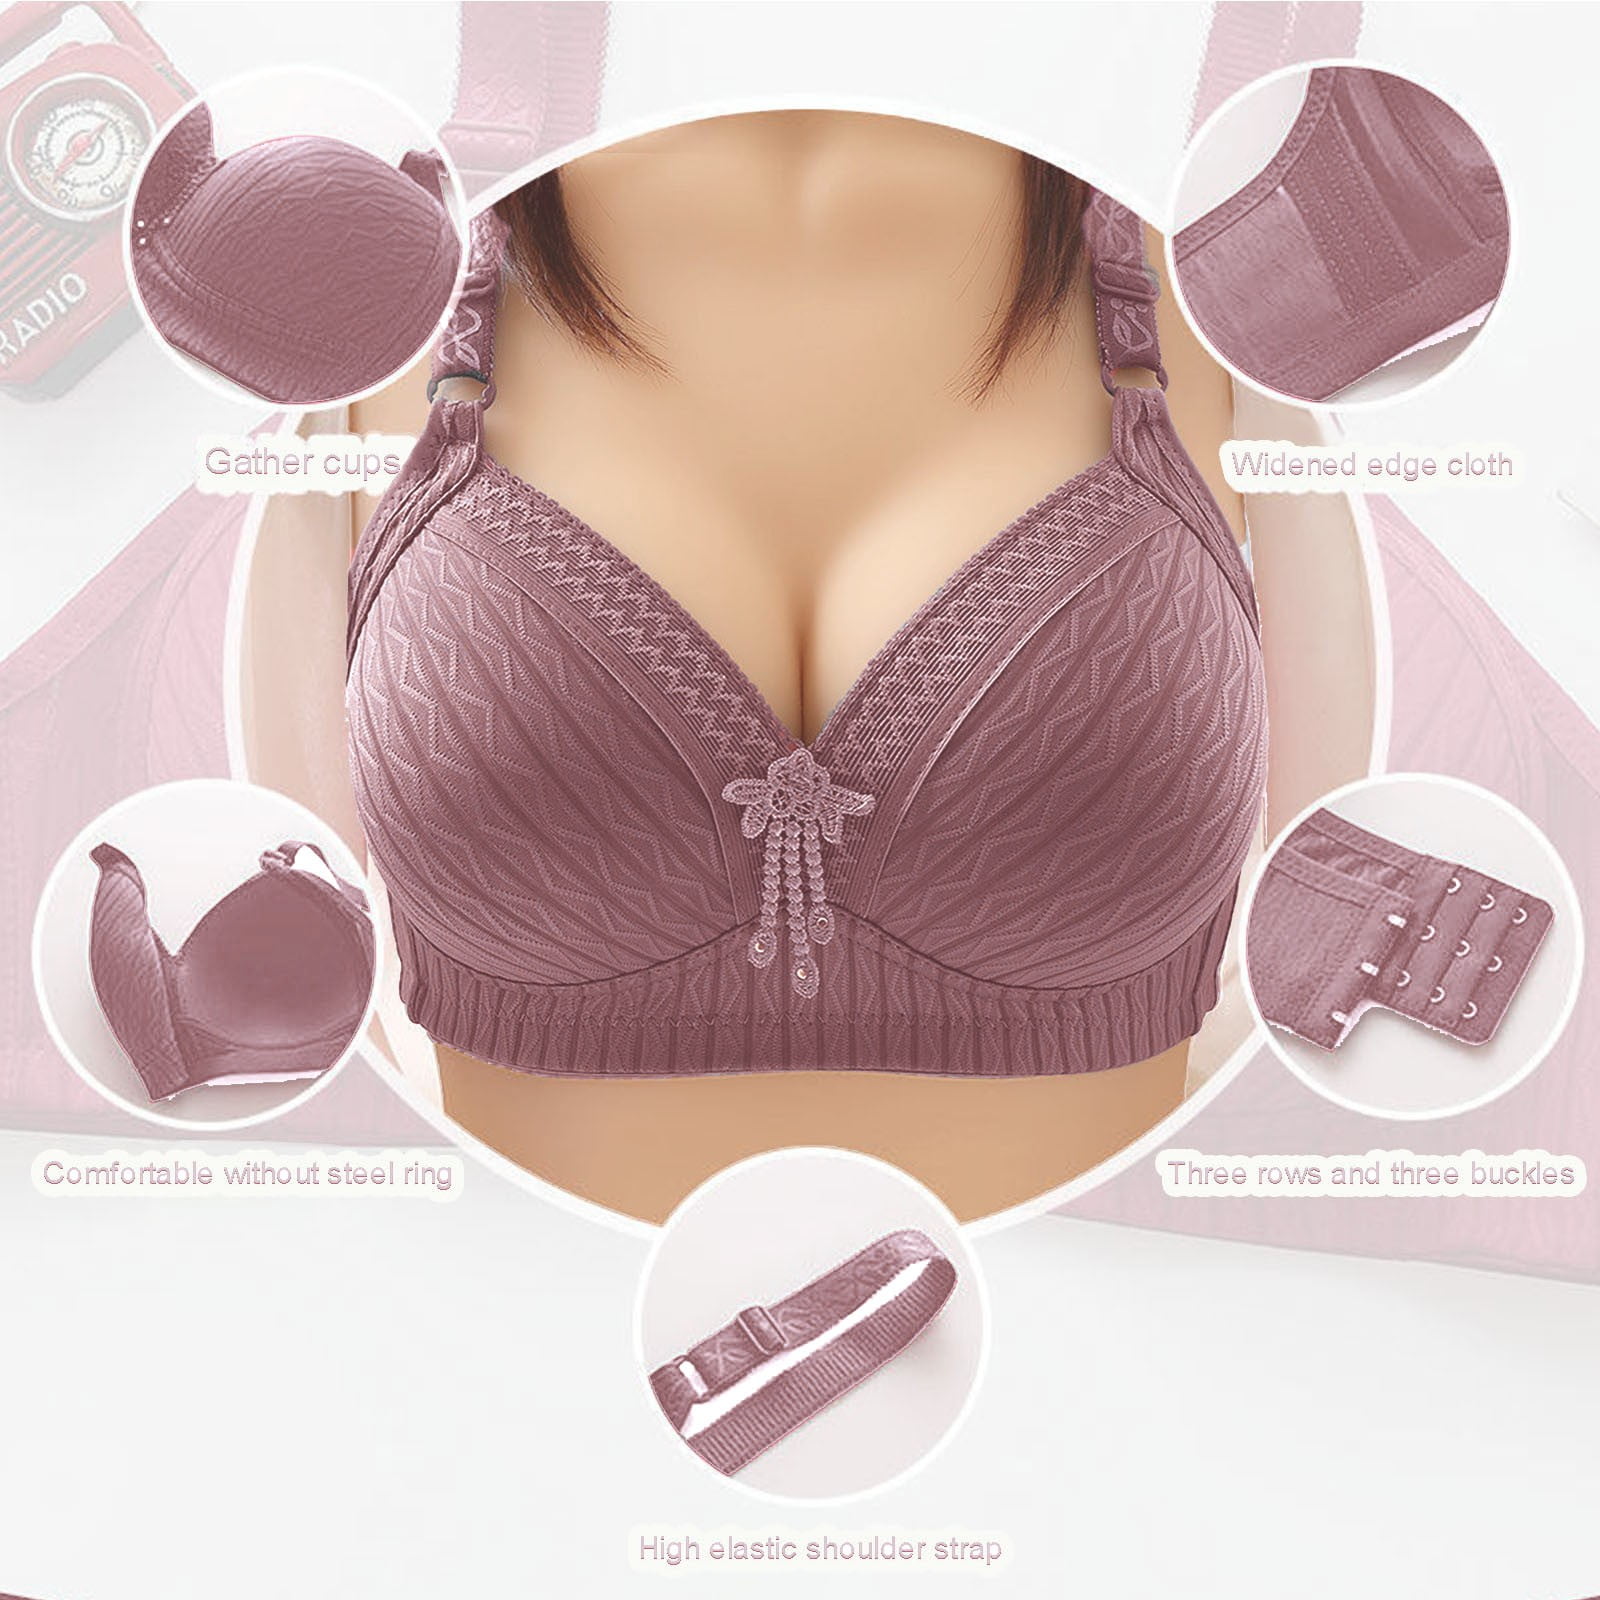 Semi-soft bra with delicate embroidery for large breasts Lupoline 2255 Big  buy at best prices with international delivery in the catalog of the online  store of lingerie